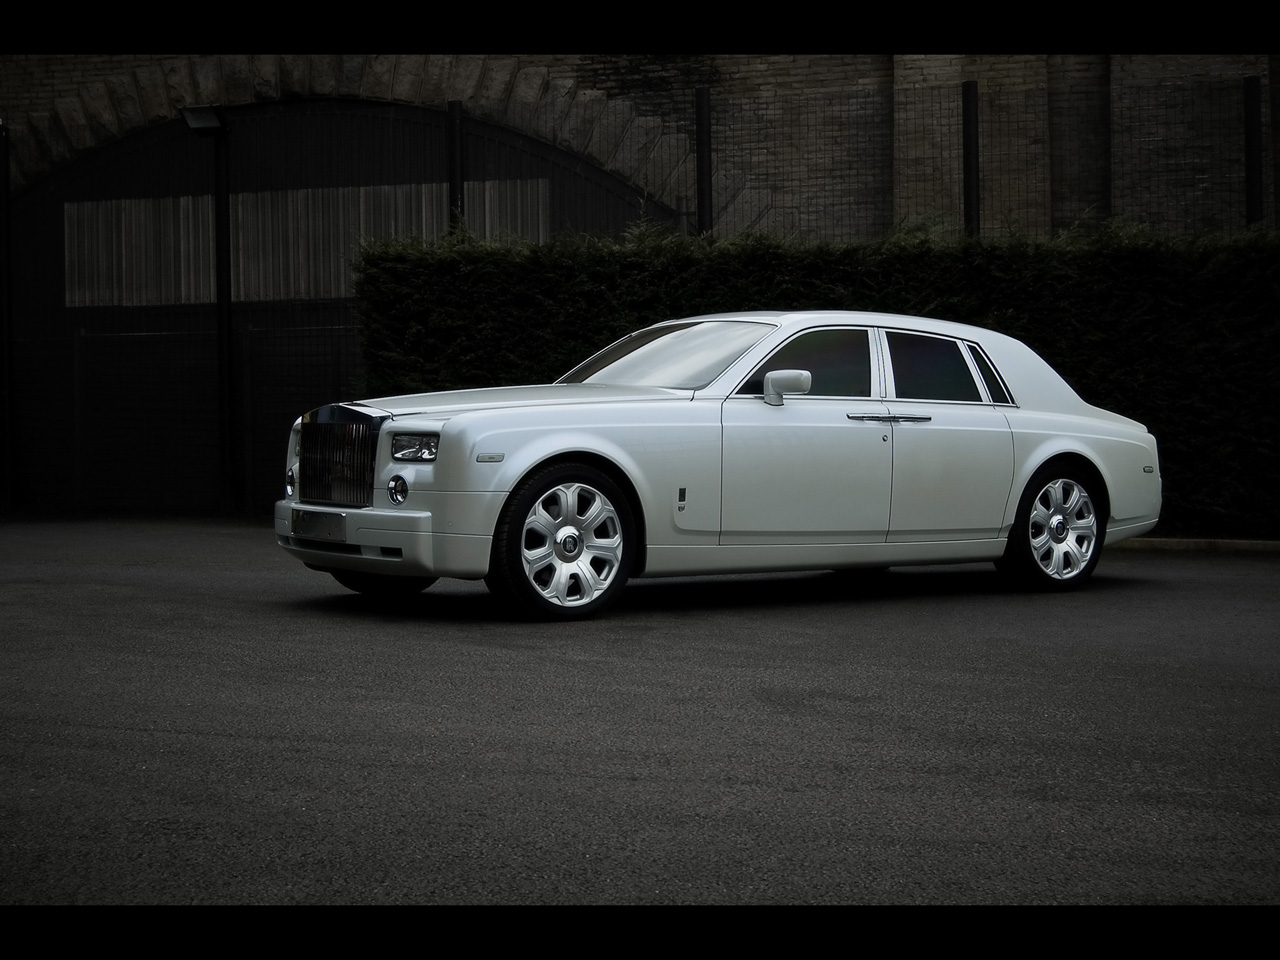 2009 Project Kahn Rolls-Royce Phantom - Front And Side - 1280x960 ...